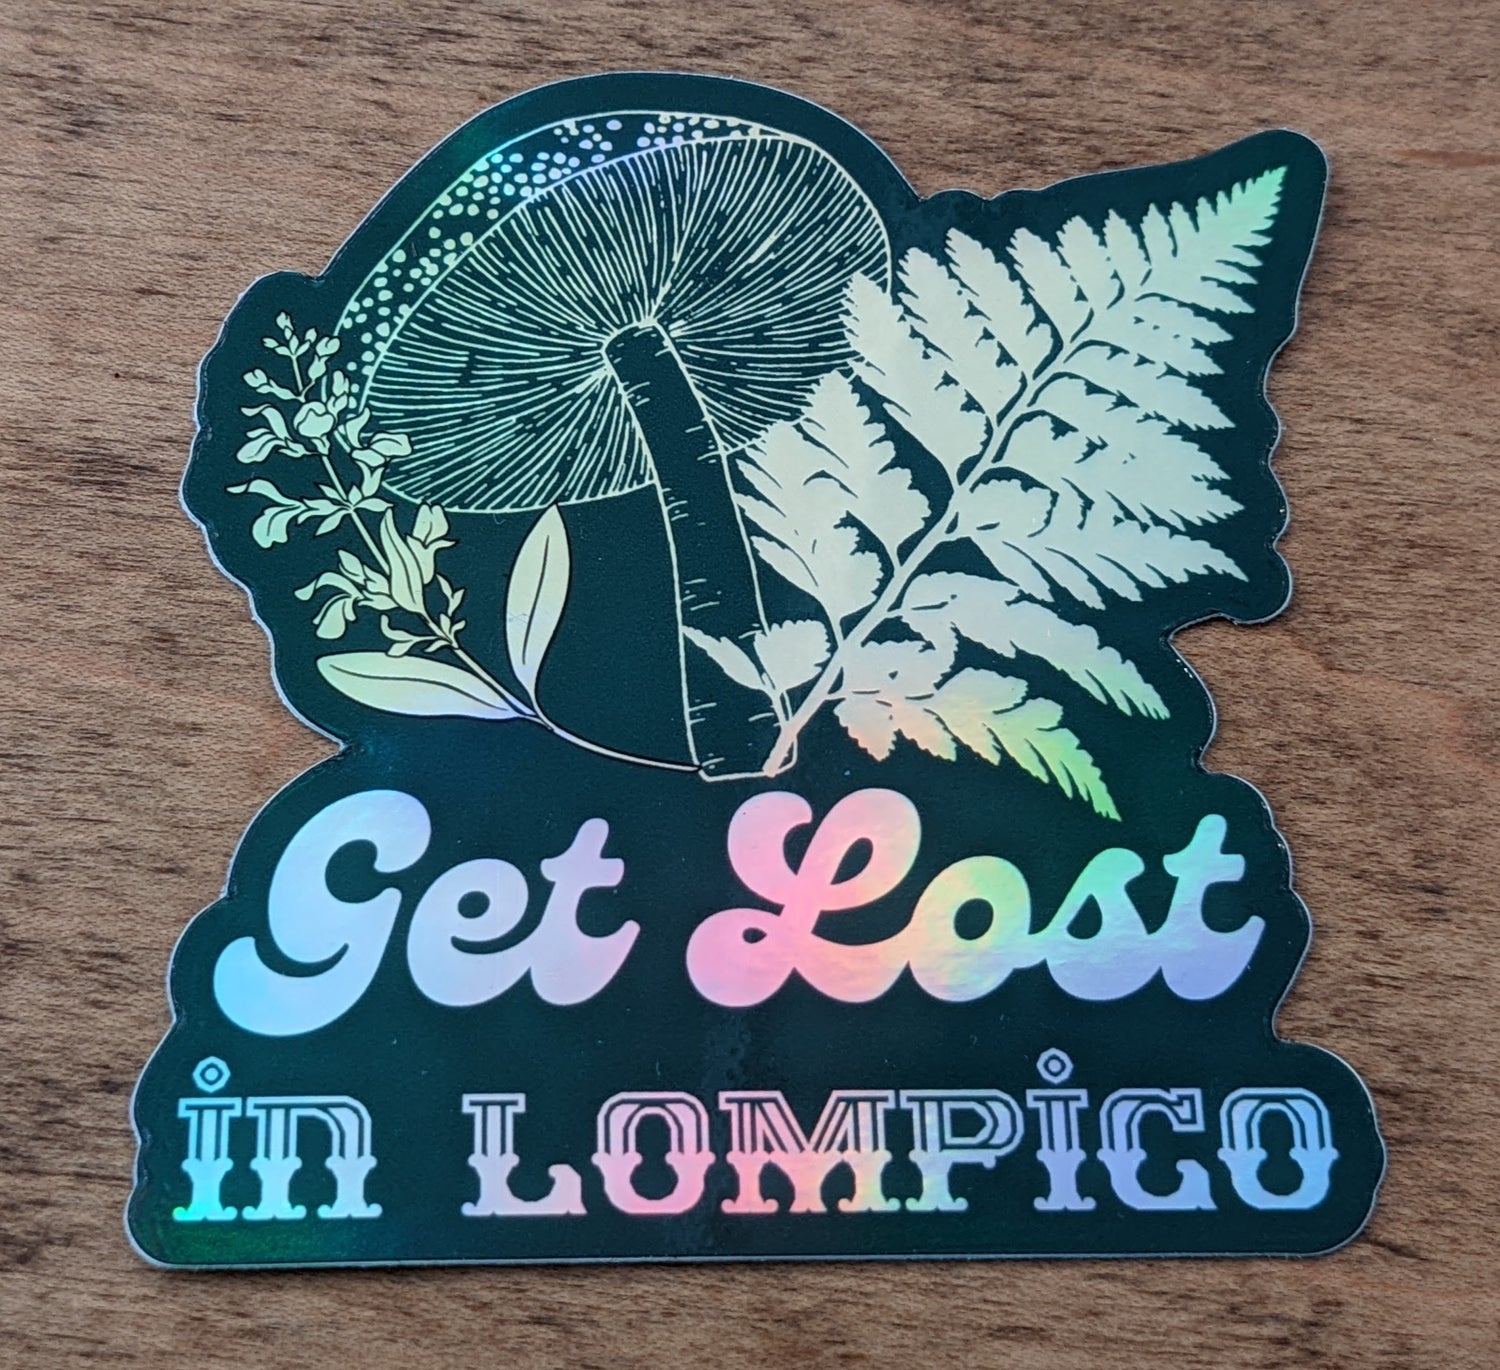 Mountain Talk holographic green sticker reading Get Lost in Lompico with fern and mushroom design